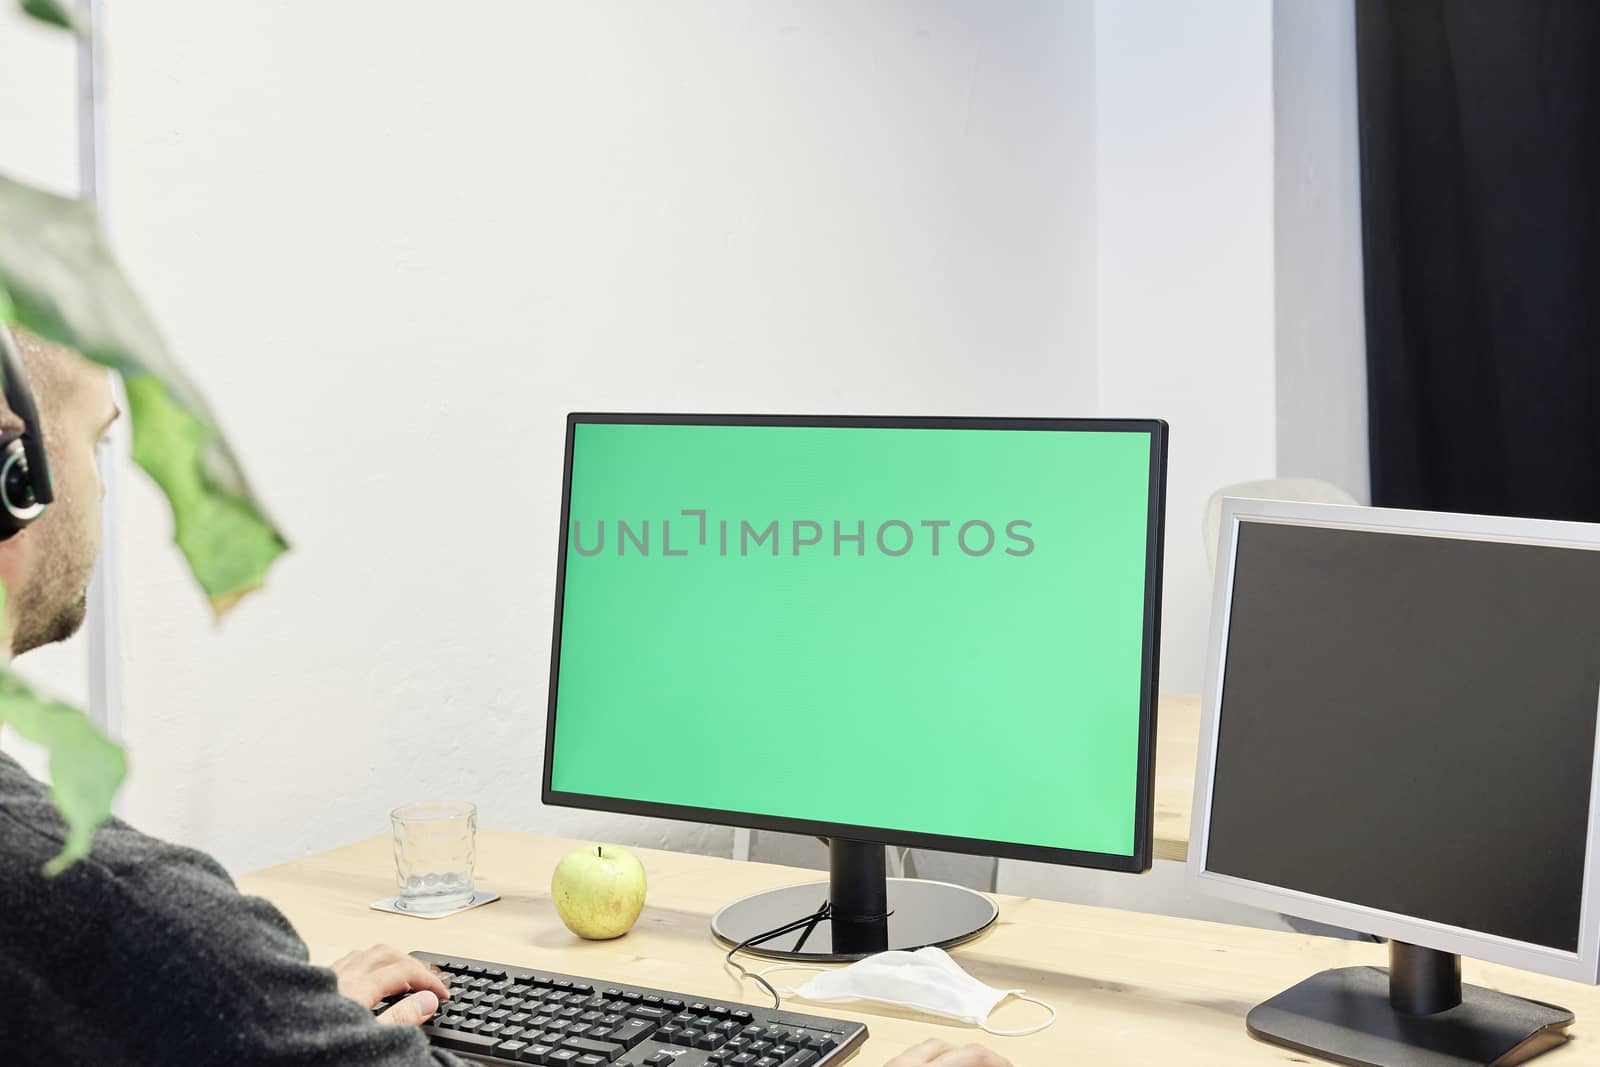 Man at his workplace with a computer and a green screen, mask, apple and glass of water on his desktop